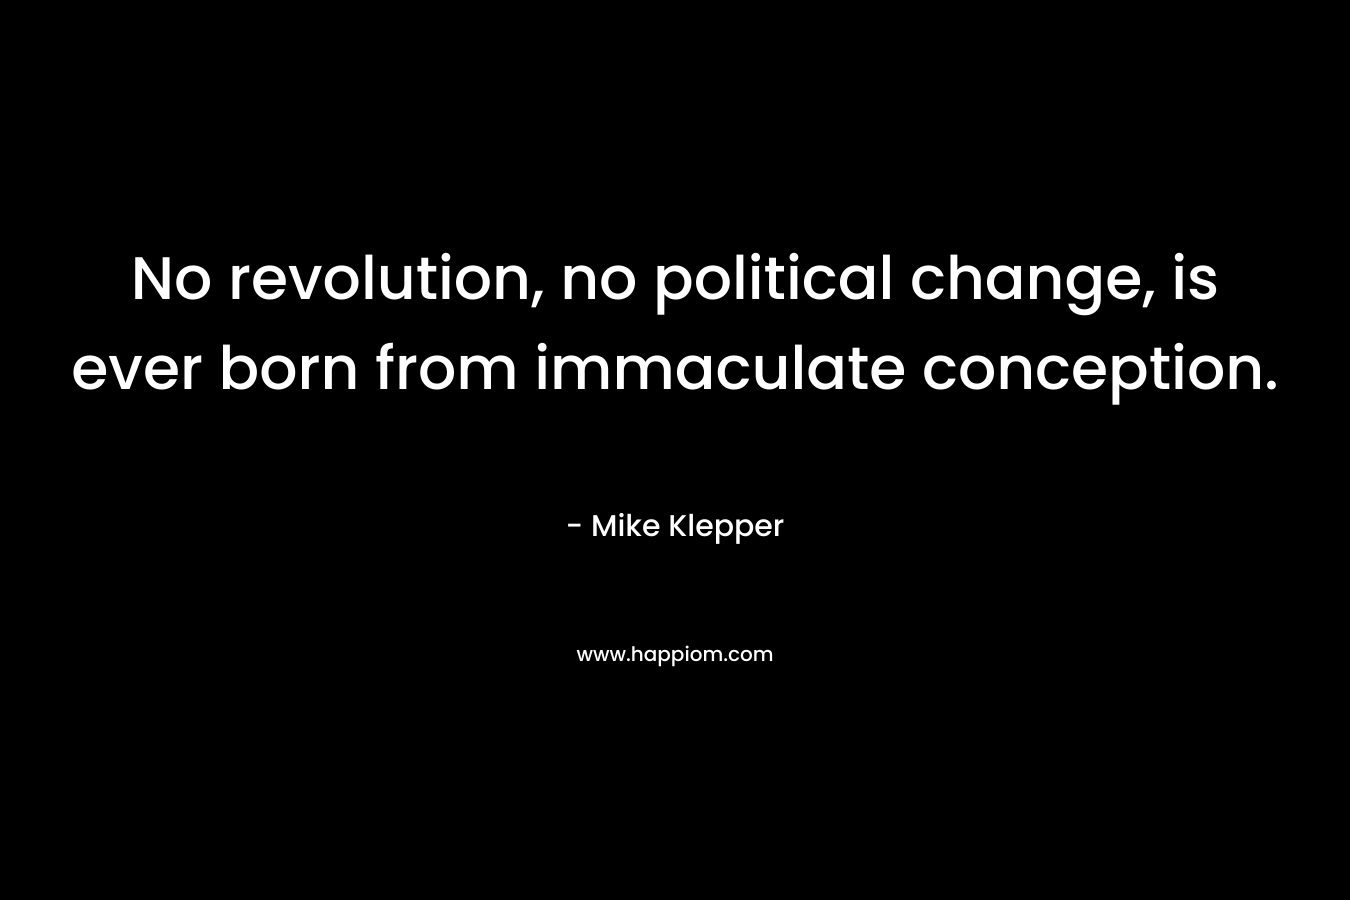 No revolution, no political change, is ever born from immaculate conception. – Mike Klepper